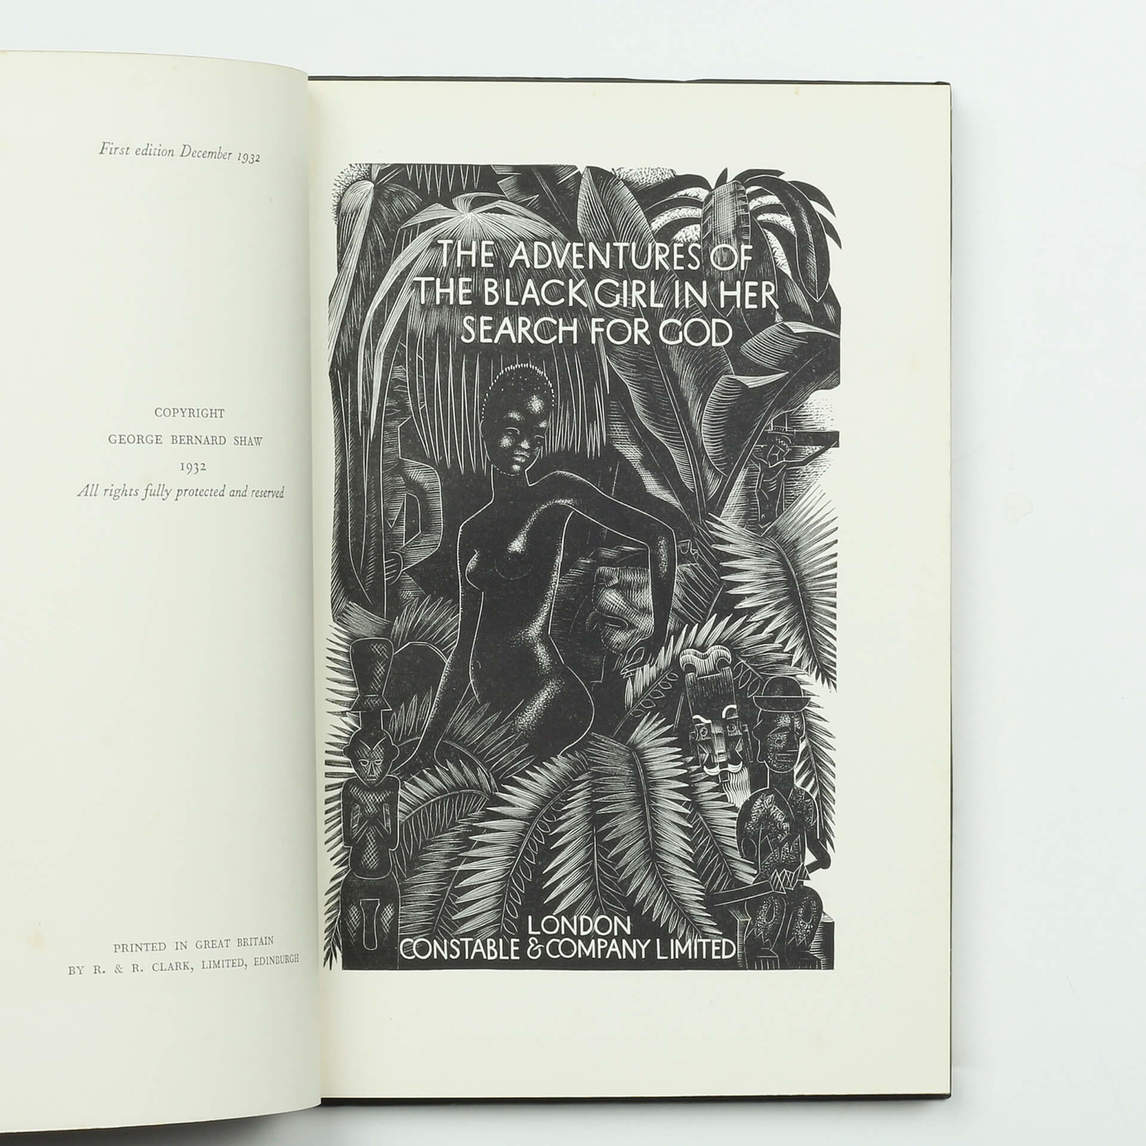 Art Canada Institute, original cover, George Bernard Shaw's The Adventures of the Black Girl in Her Search for God, 1932, illustrations by John Farleigh